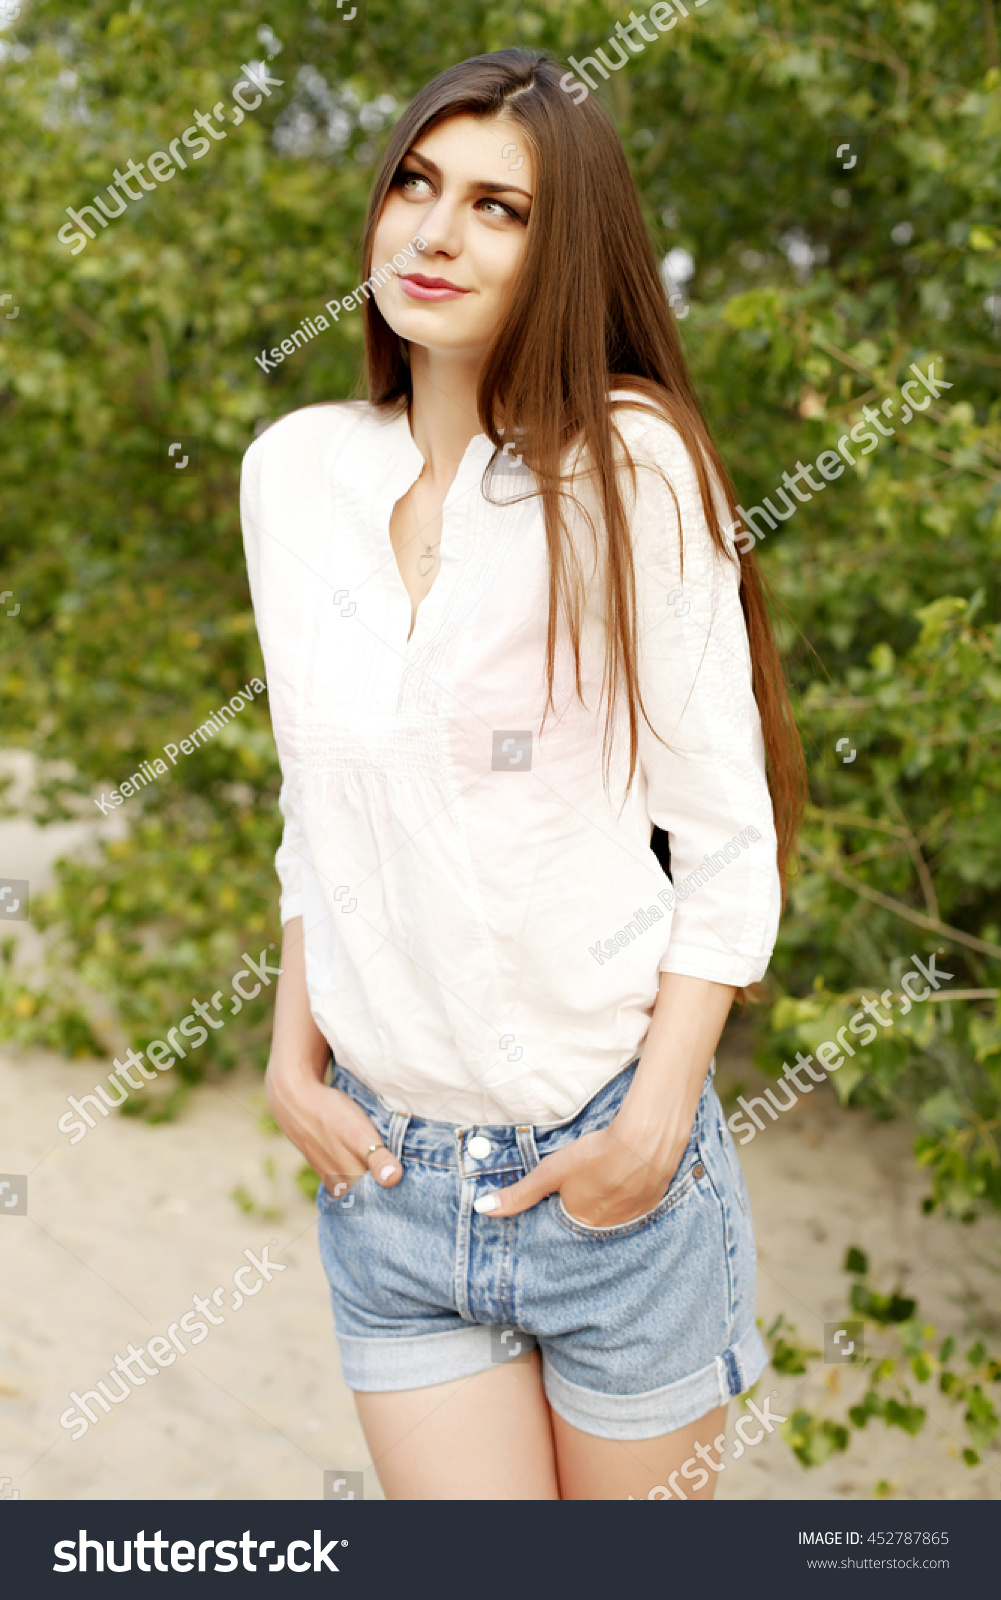 Young beautiful stylish girl with long healthy hair in white blouse and jeans shorts walking and posing in the park. Outdoors, lifestyle #452787865